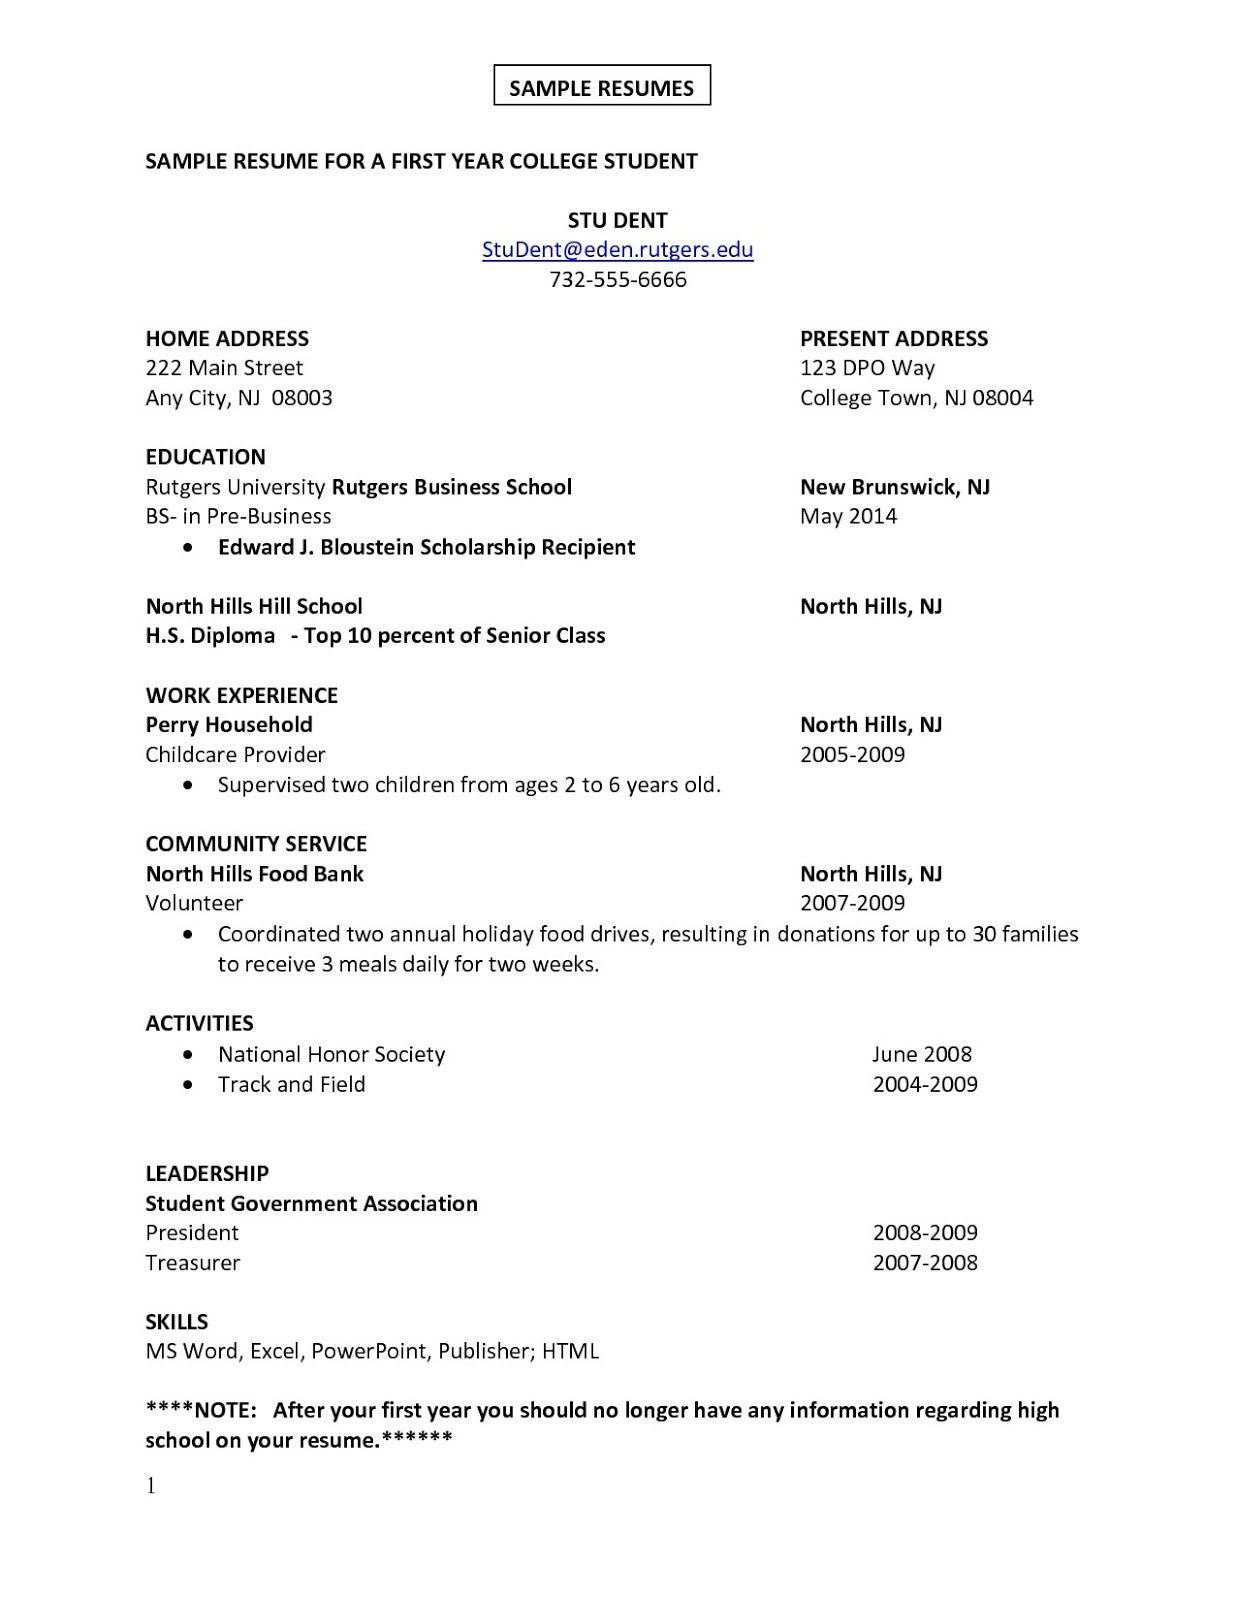 Resume Template for Students First Job First Job Sample Resume Sample Resumes First Job Resume, Job …